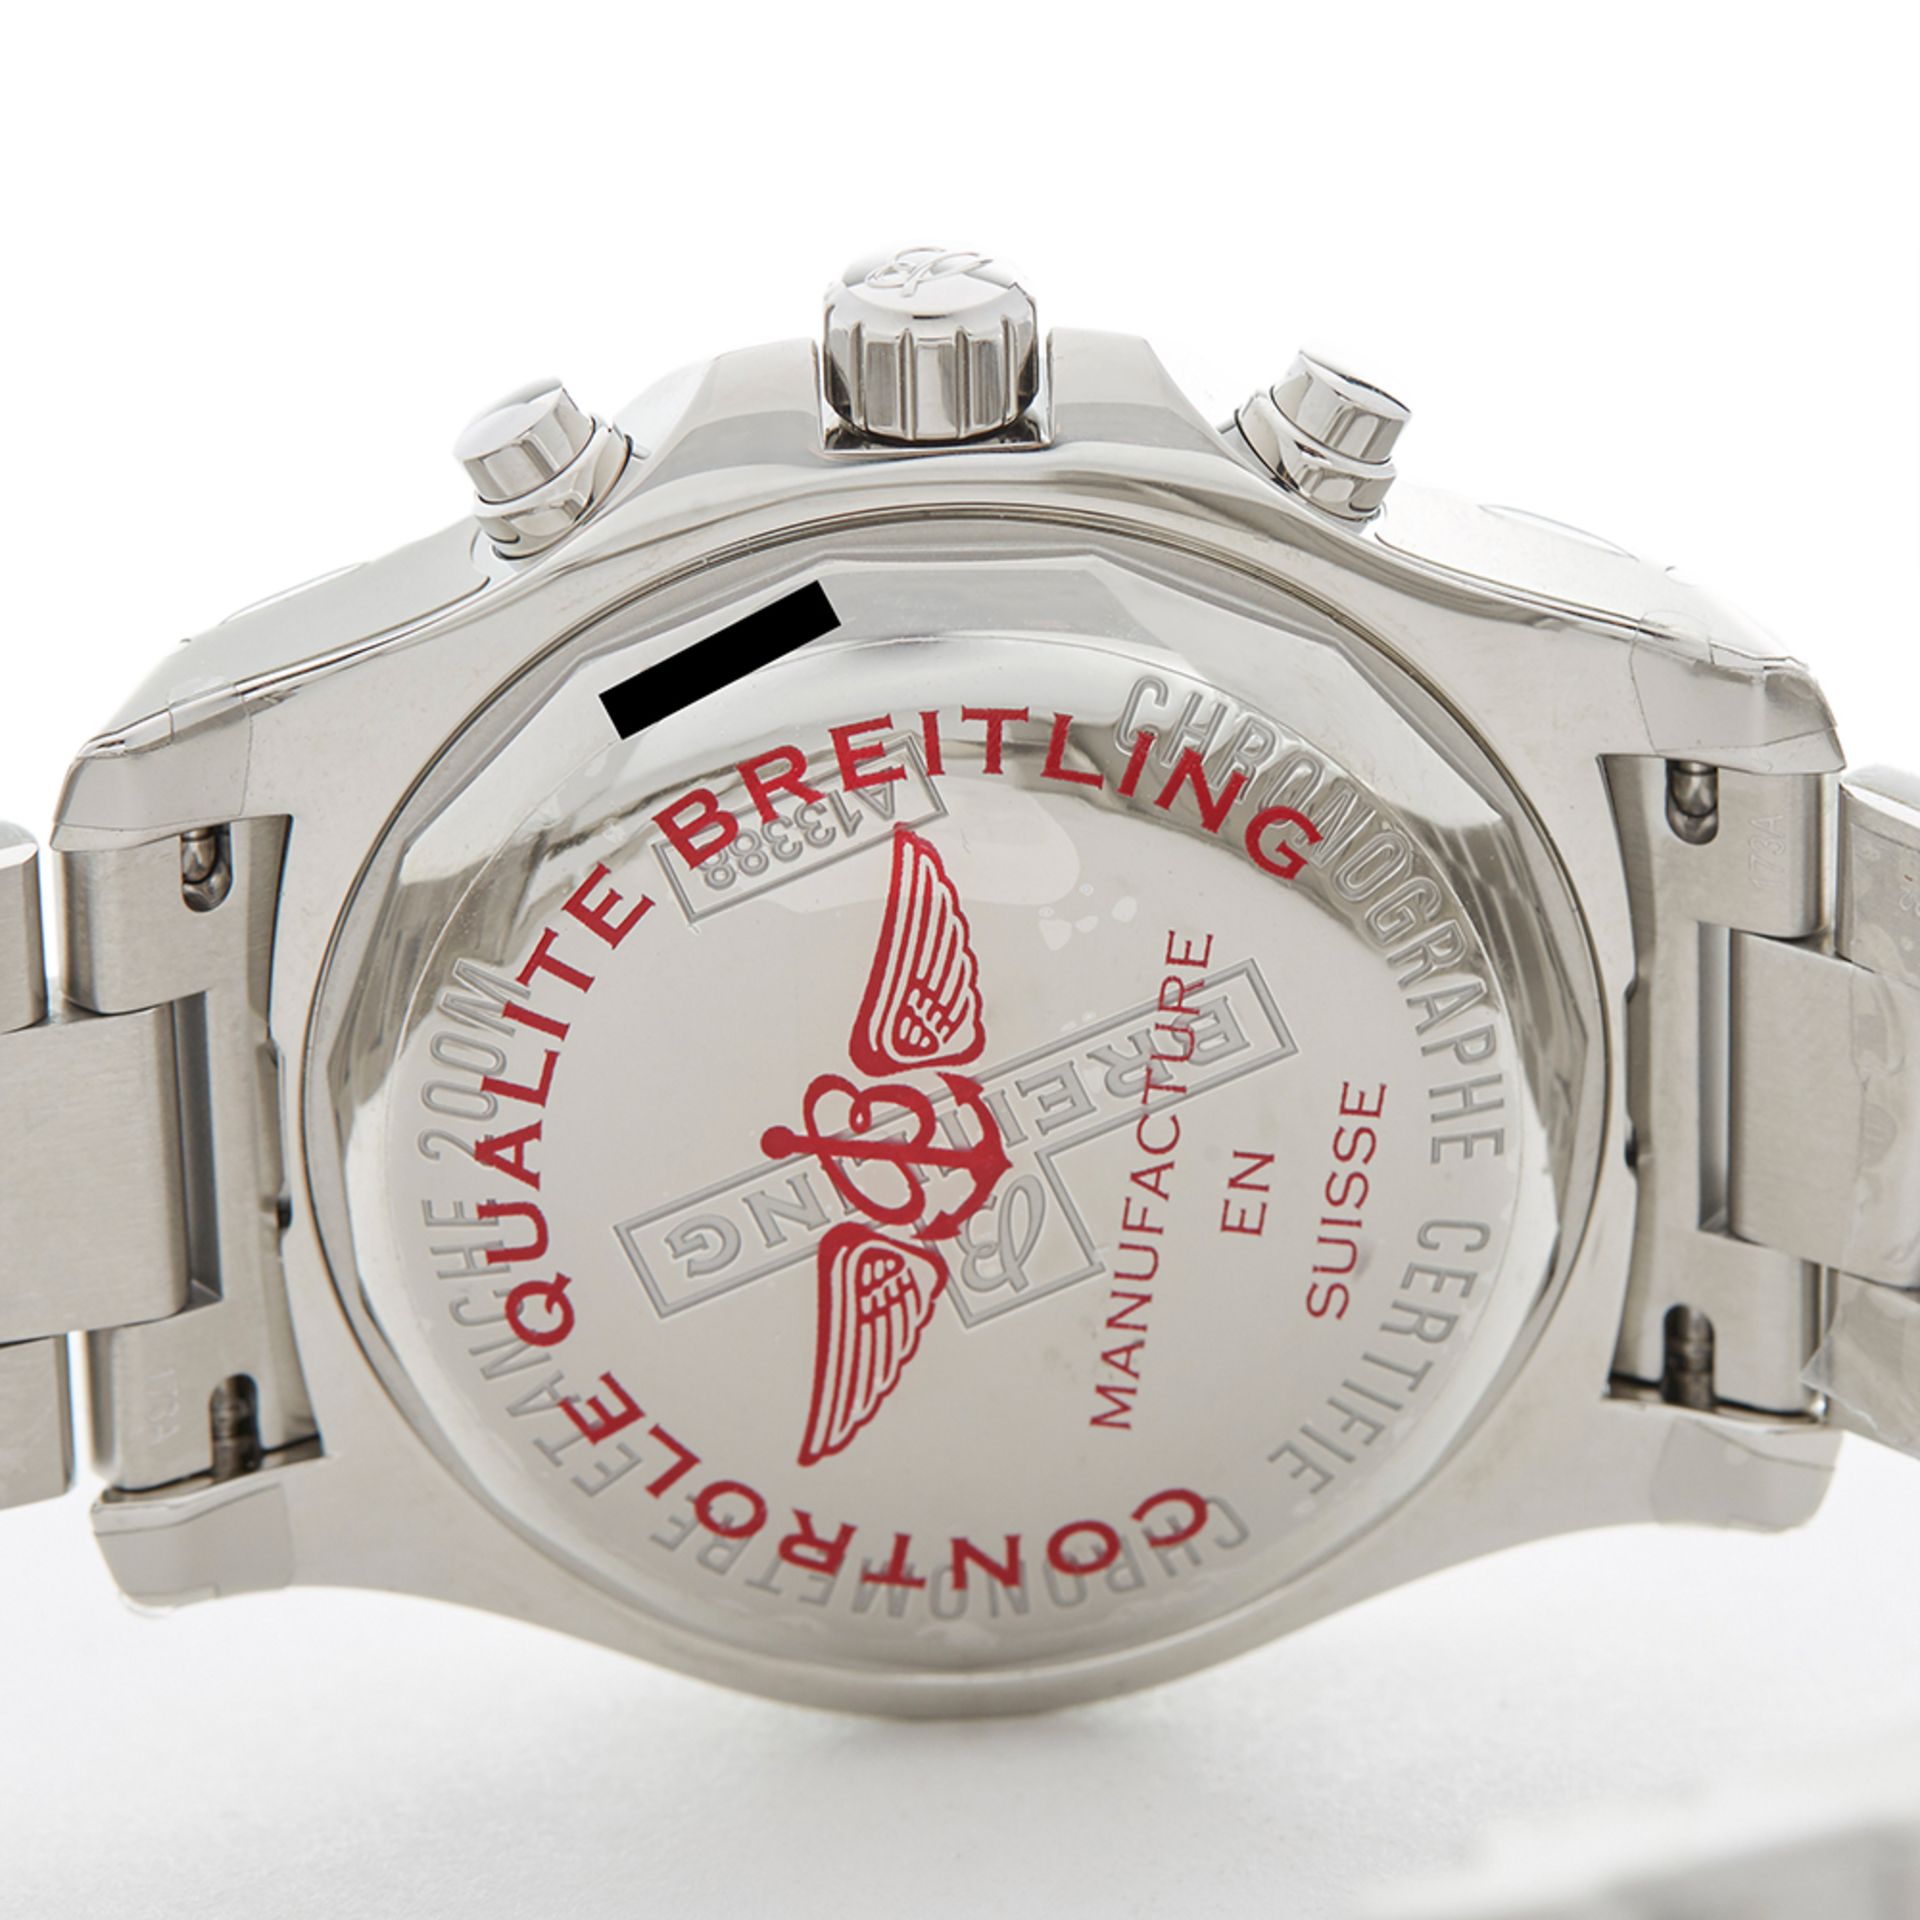 Breitling, Colt Chronograph 44mm Stainless Steel A1338811 - Image 8 of 8